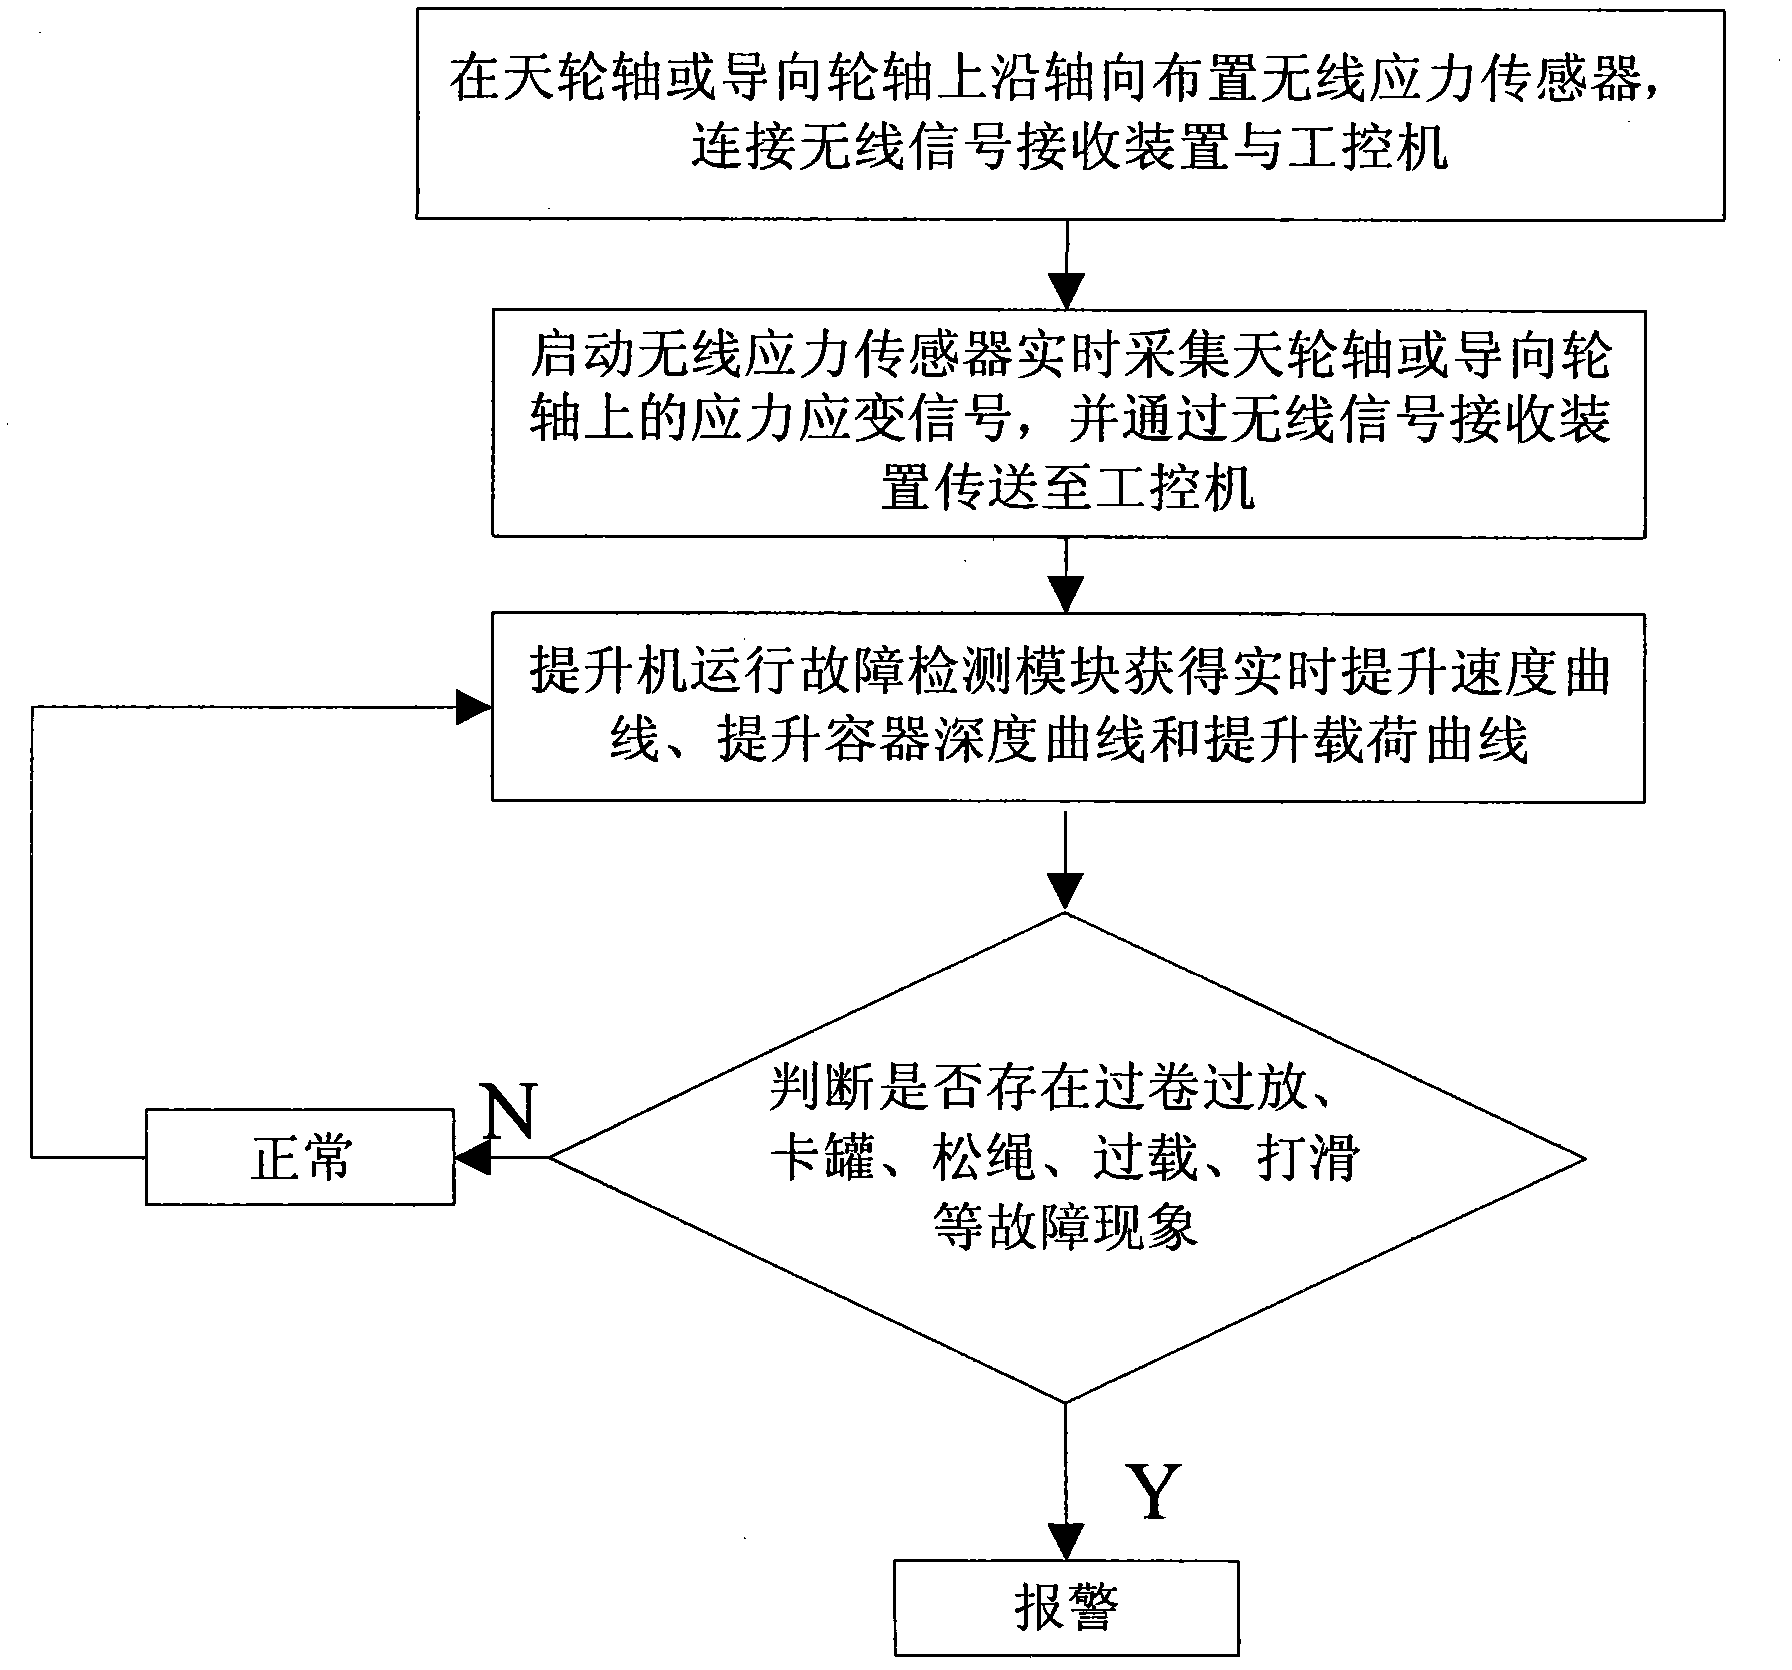 Method for detecting operation troubles of mine hoist